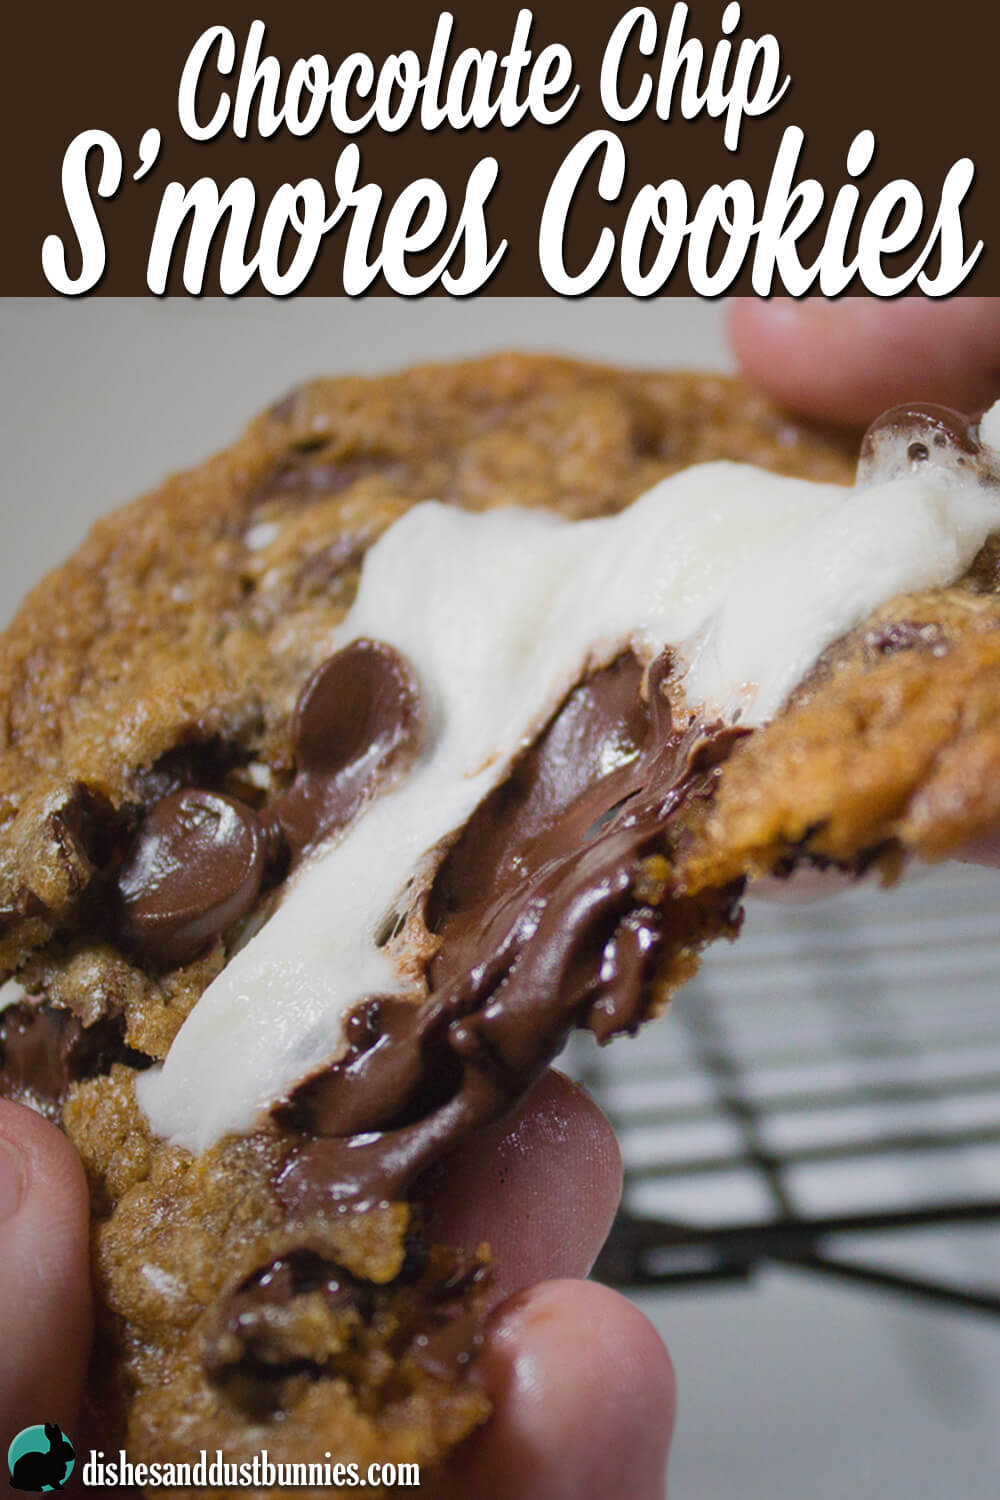 Chocolate Chip S'mores Cookies from dishesanddustbunnies.com